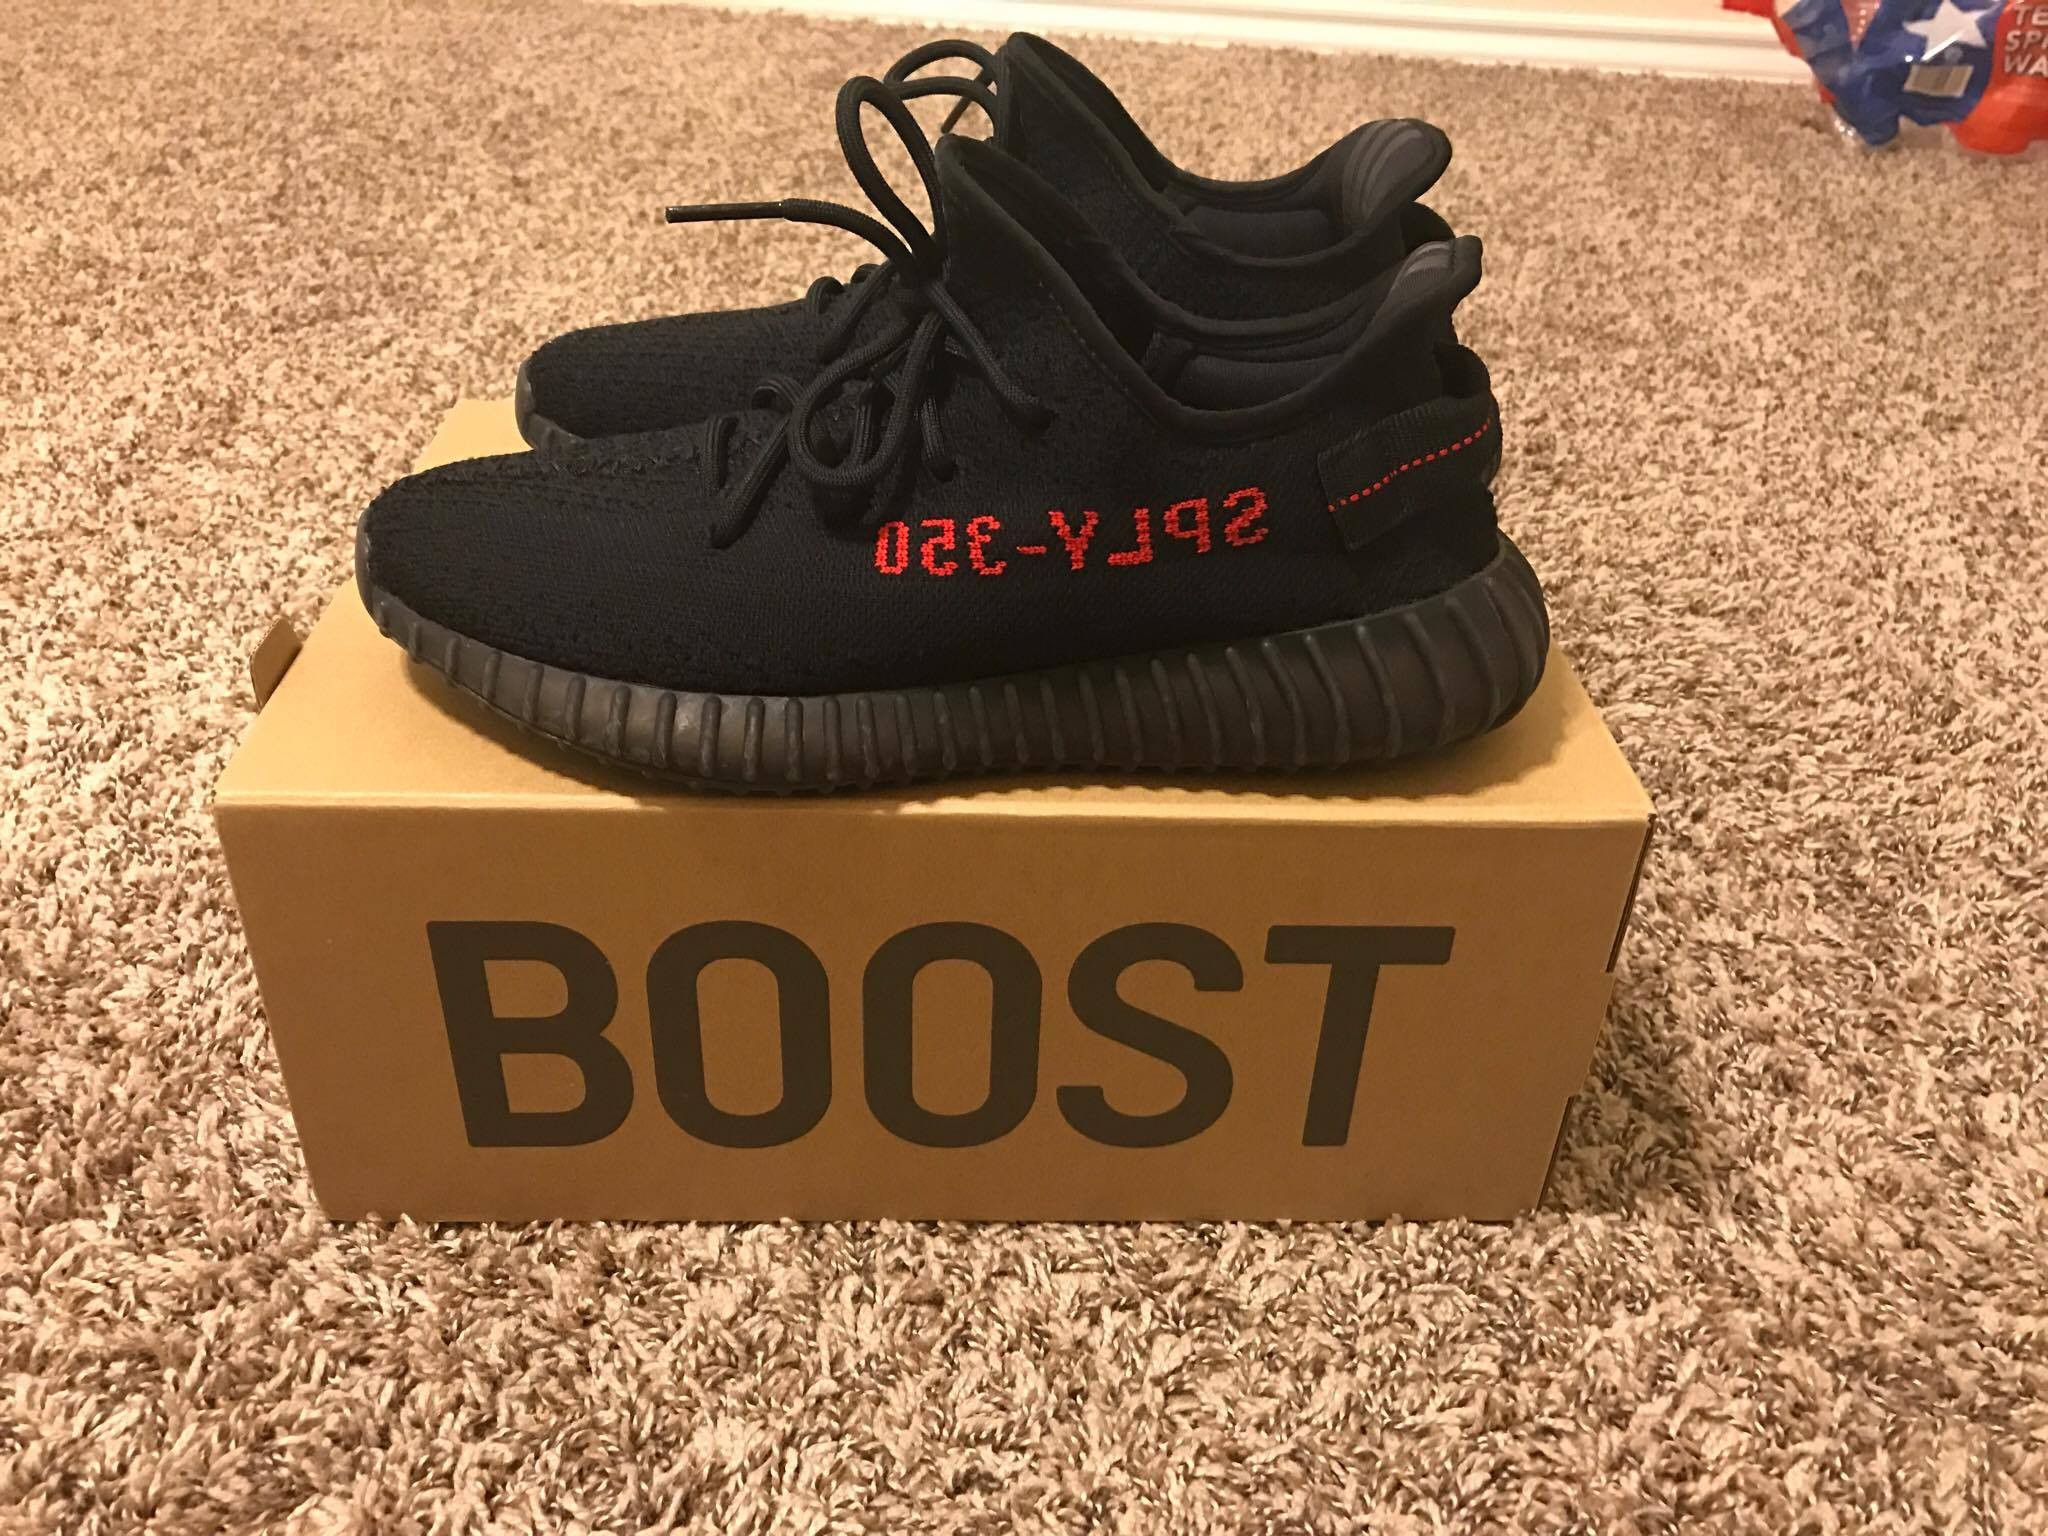 Adidas ADIDAS YEEZY BOOST 350 V2 BLACK RED BRED CP9652 LEGIT with Adidas receipt-Sz 9 Size US 9 / EU 42 - 1 Preview